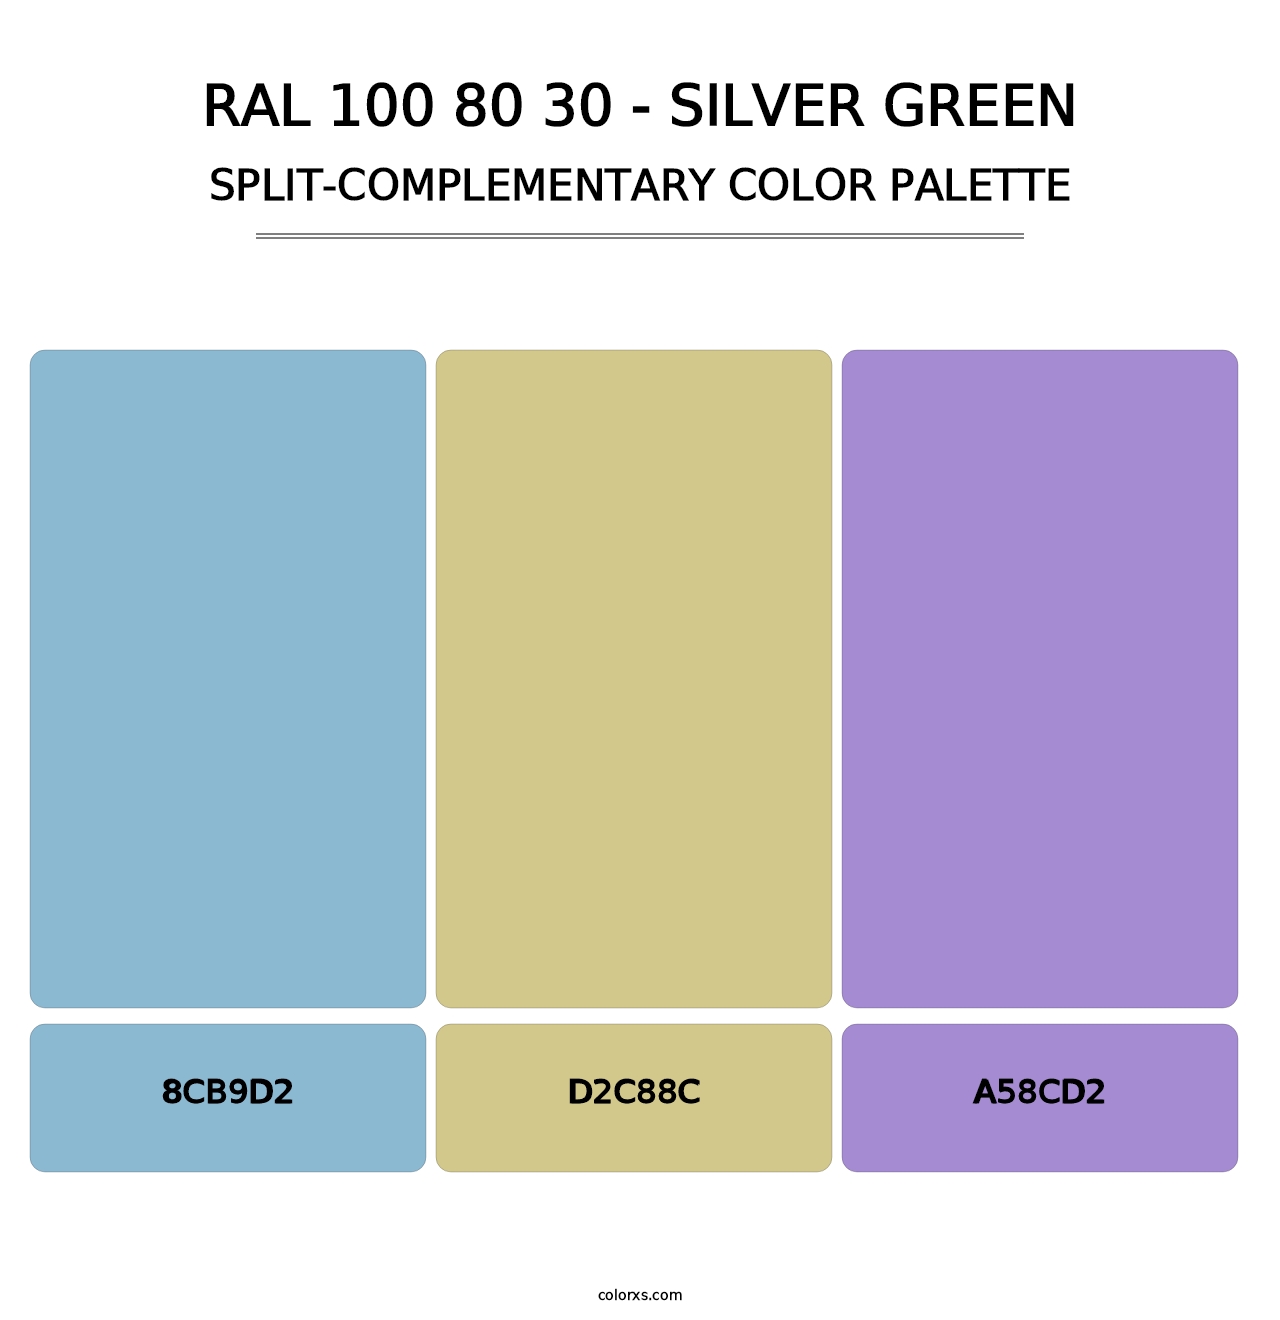 RAL 100 80 30 - Silver Green - Split-Complementary Color Palette